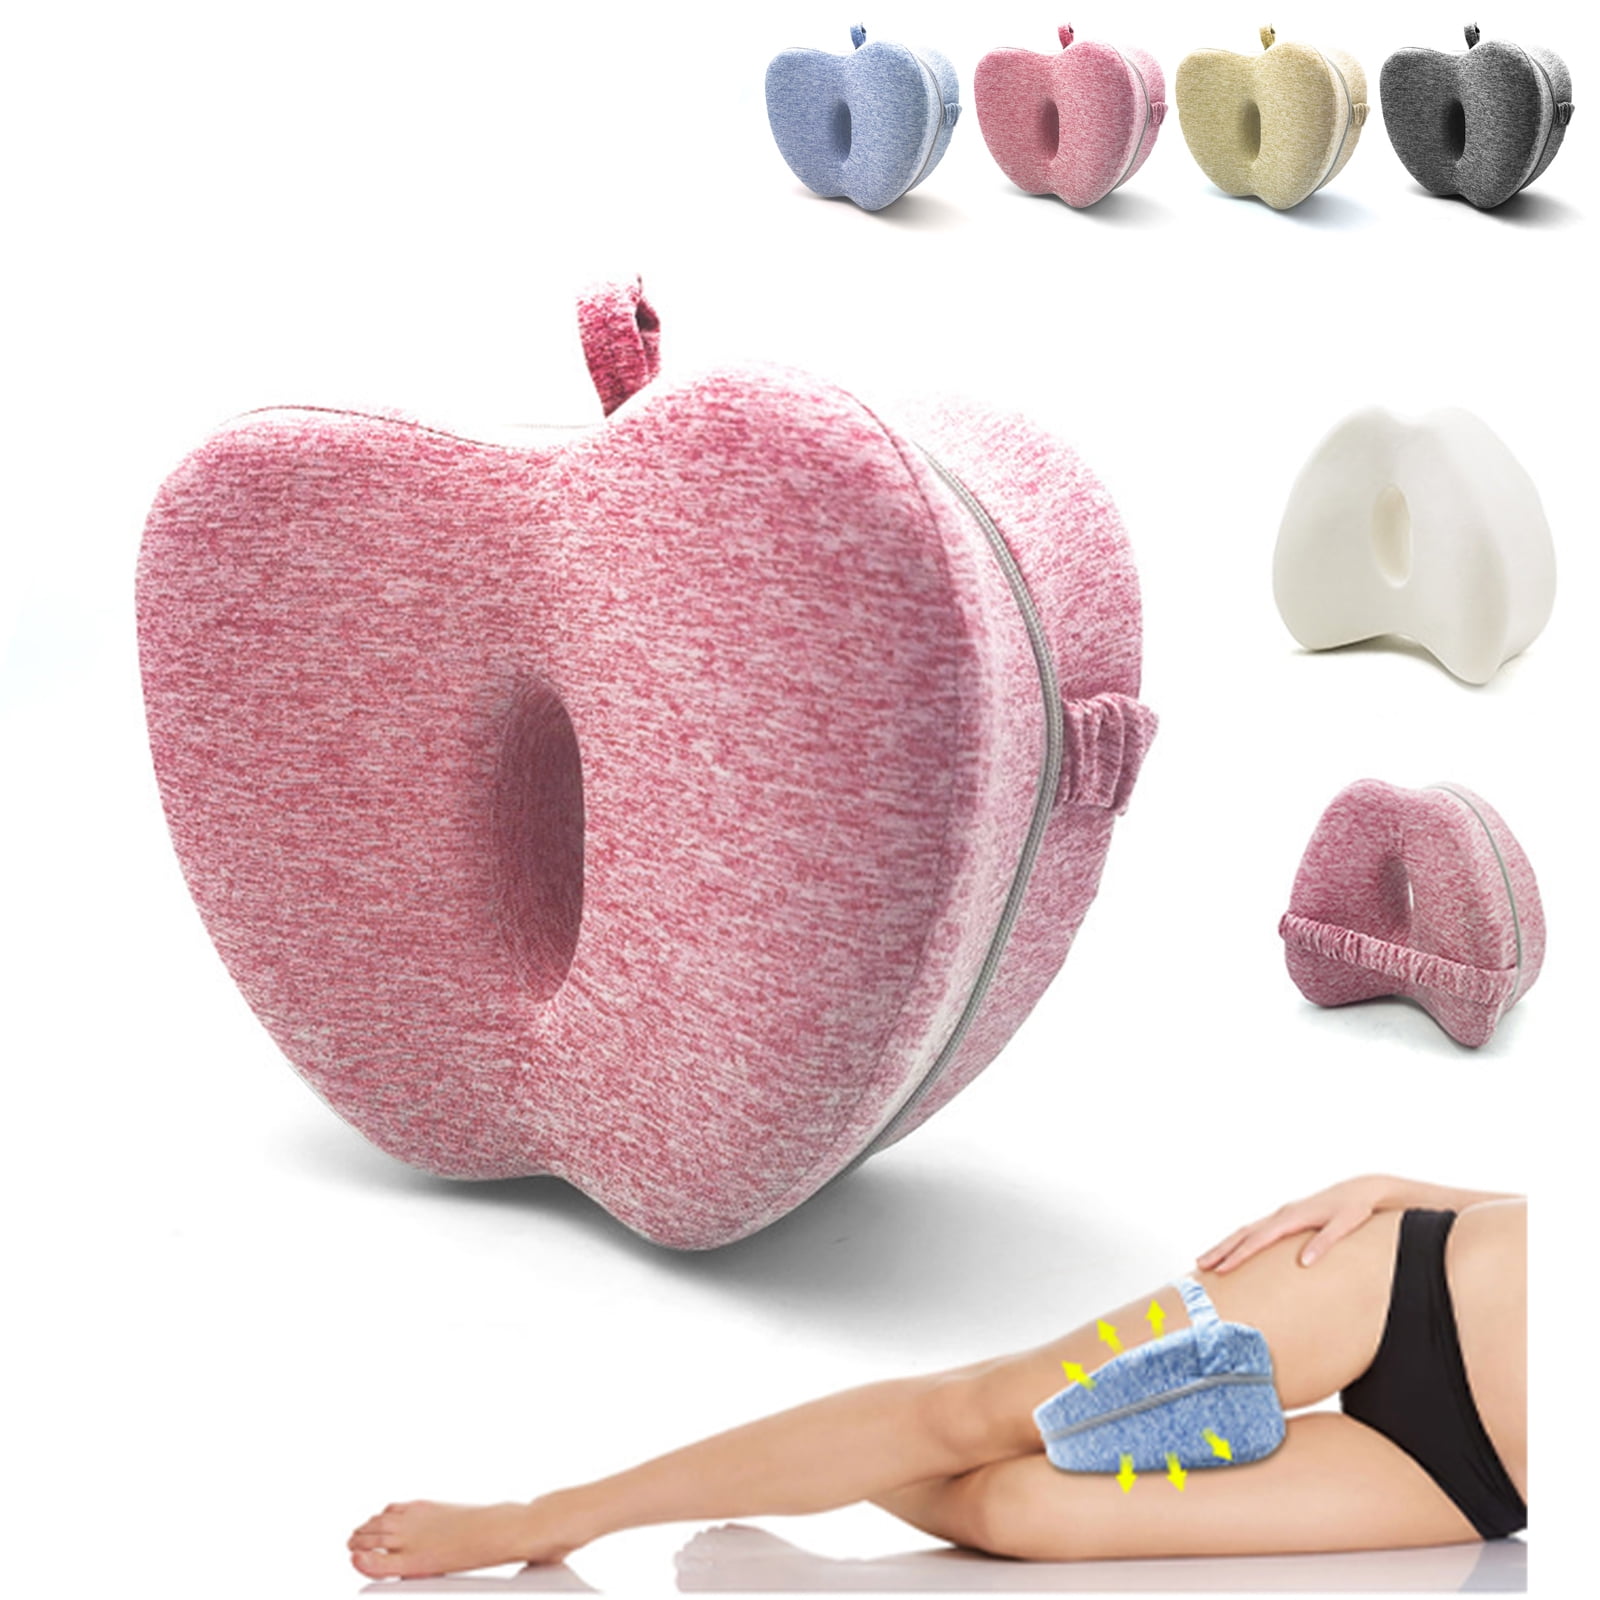  TGMALL Smoothspine Alignment Pillow,Relieve Hip Pain